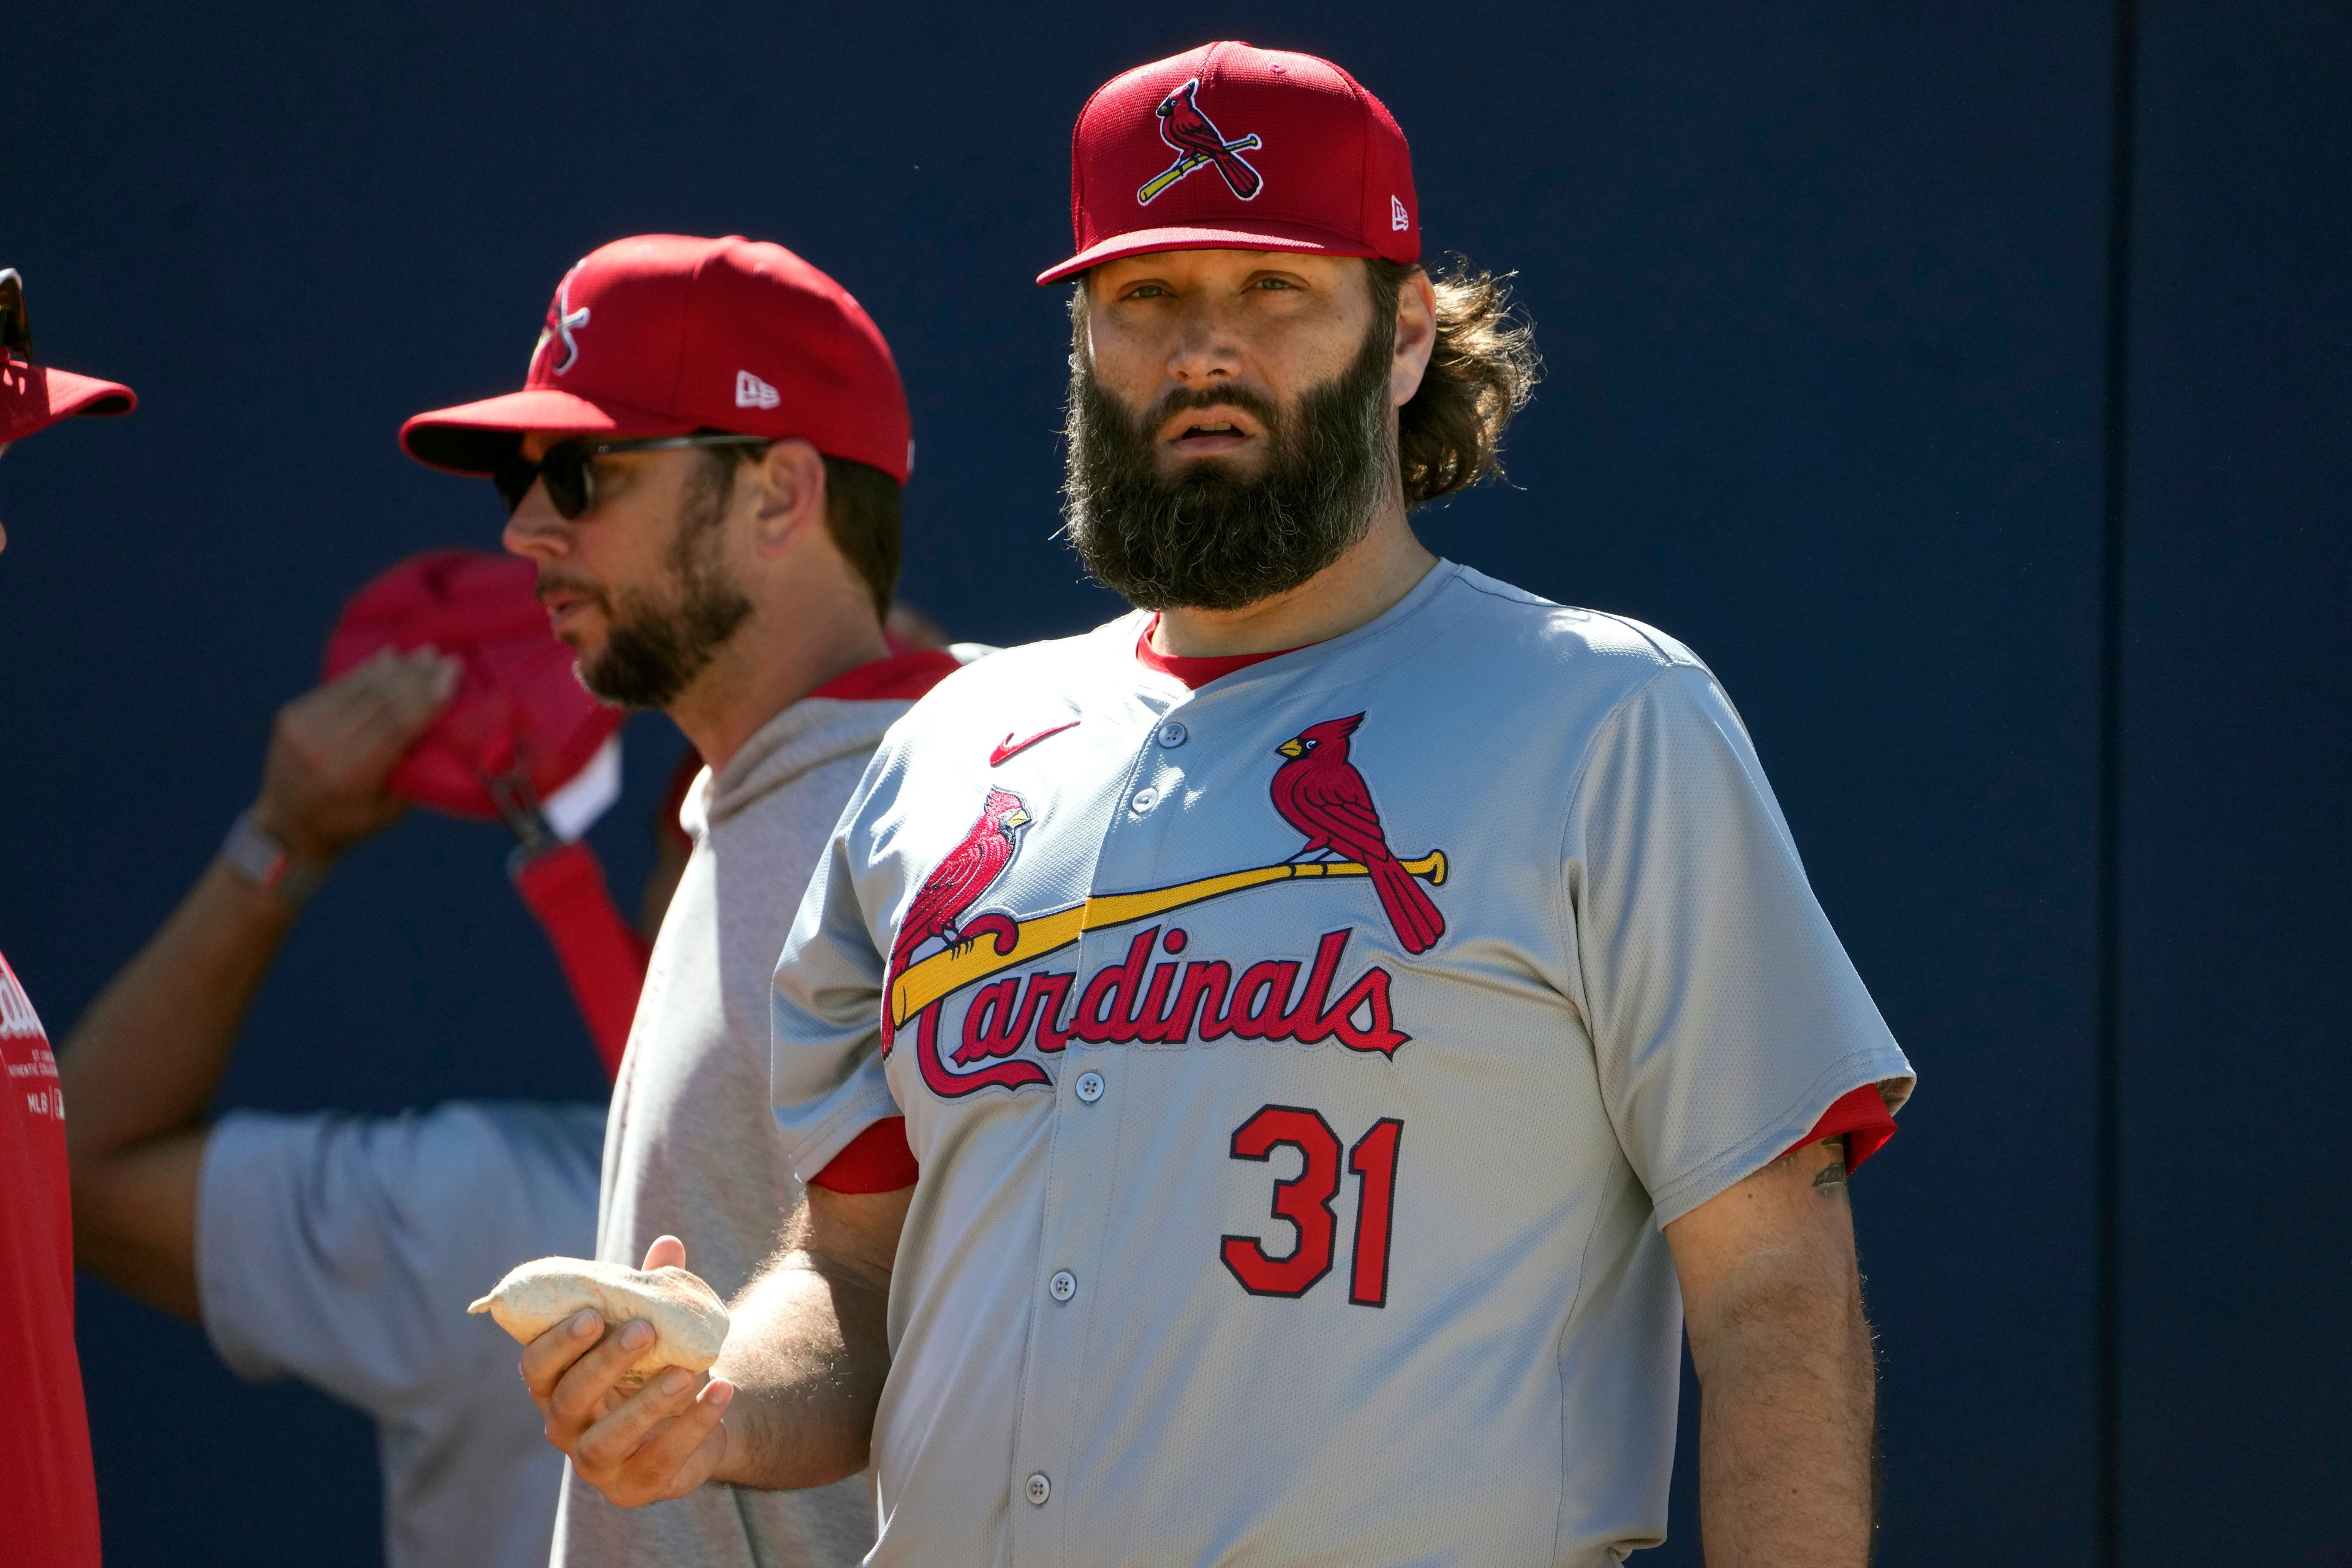 Lance Lynn tossed by umpire Ángel Hernández in spring training return to Cardinals